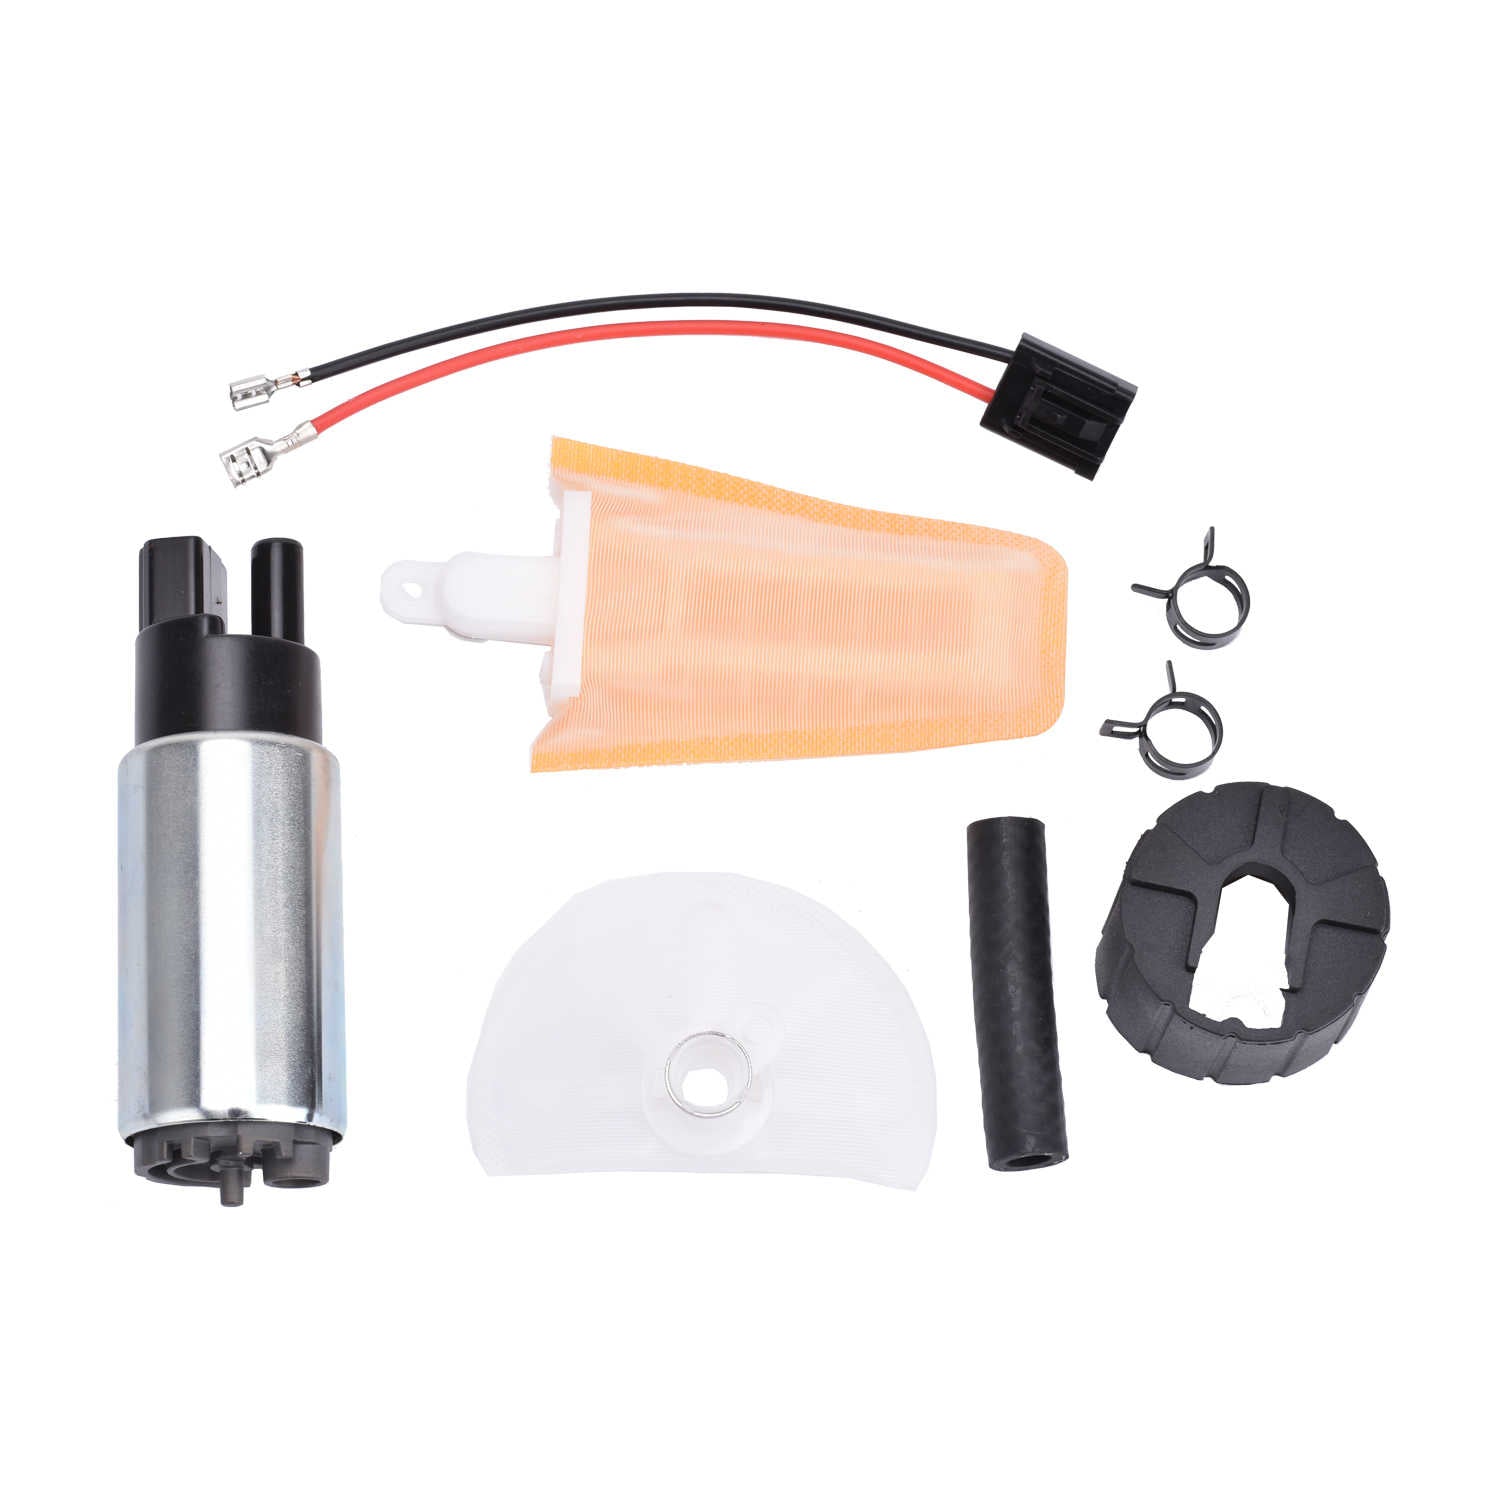 Electric Fuel Pump Kit in tank fuel pump With Installation Kit 255 LPH High Flow Fit Multiple Models Replaces E8229 E2068 E8213 EFP382A